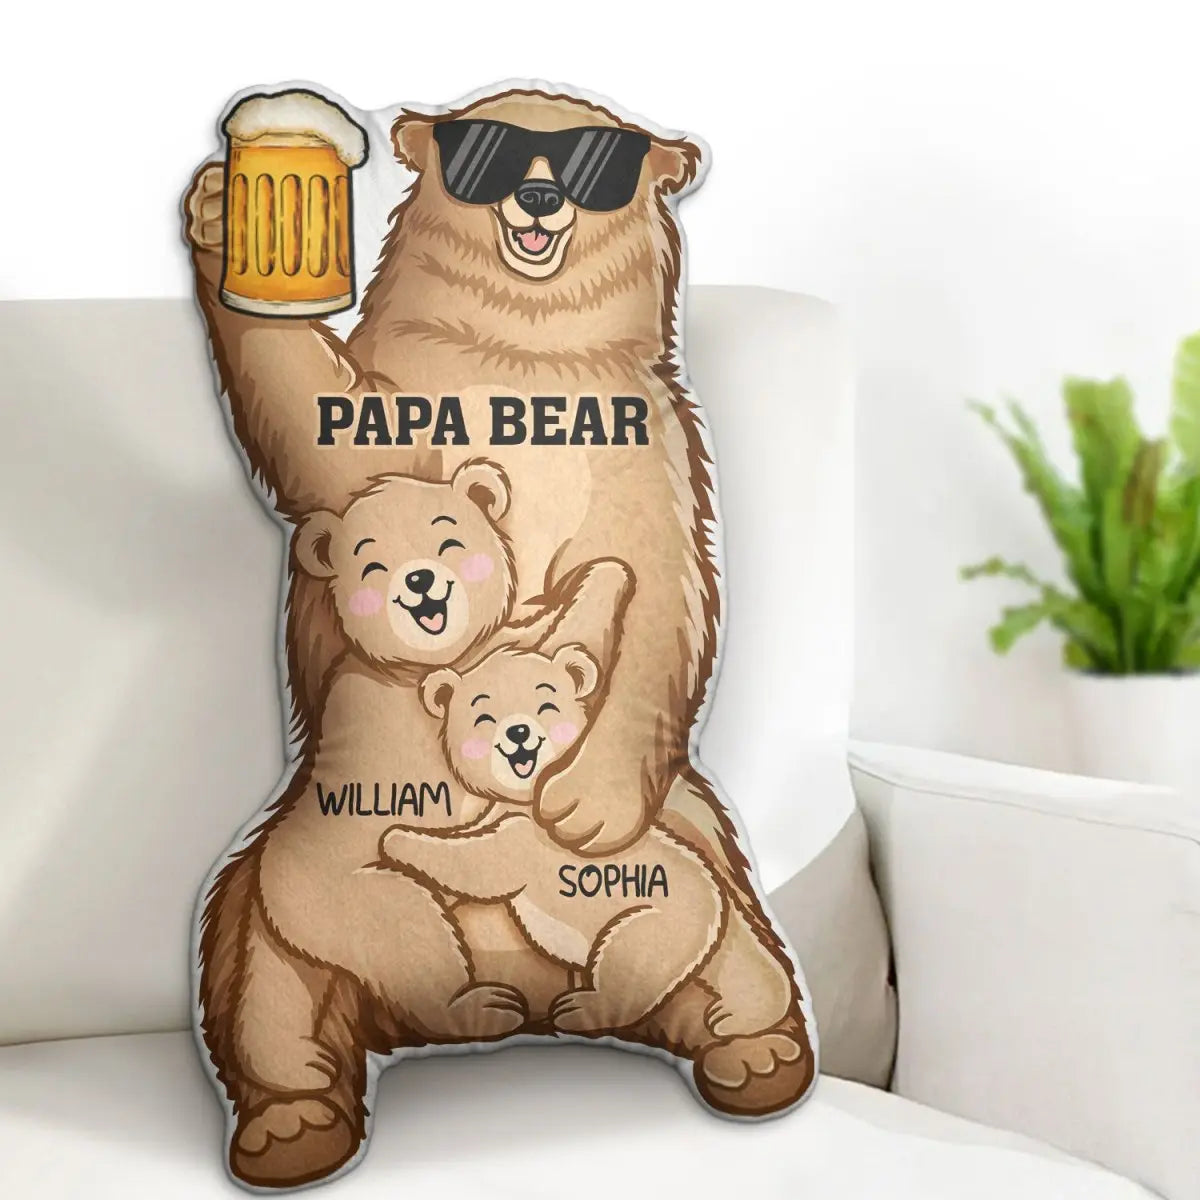 Family - Papa Bear - Gift For Fathers - Personalized Shaped Pillow Pillow The Next Custom Gift